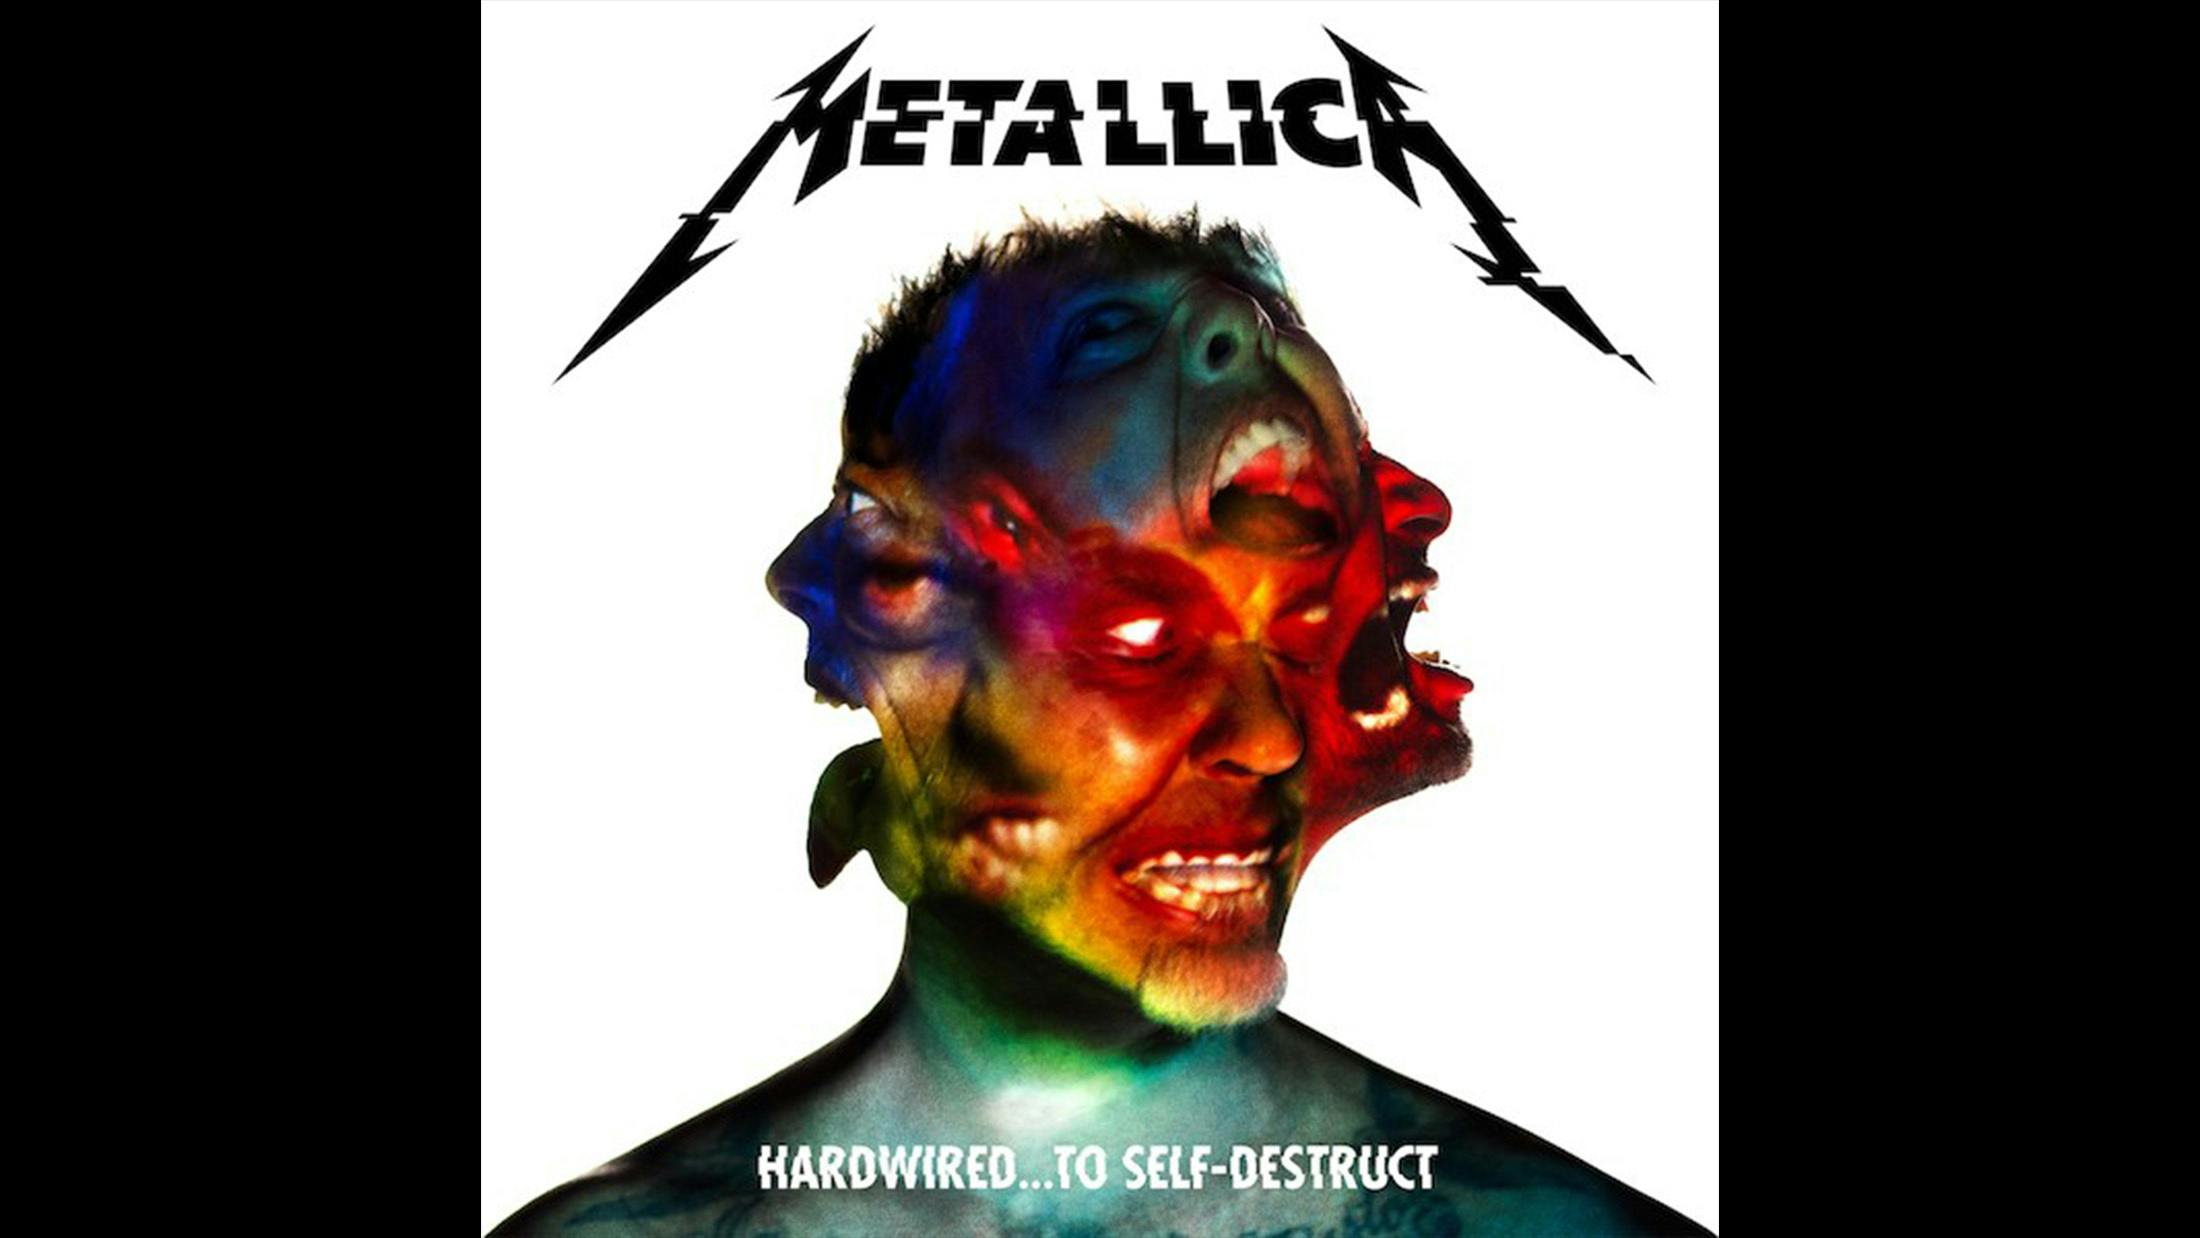 “Another one I know isn’t from this year, but I’m still digging it, and it was definitely one that was a big part of my 2017, and may well be a big part of my 2018 too. What can I really say about it? It’s Metallica, and it’s great, what more do you need to know?”